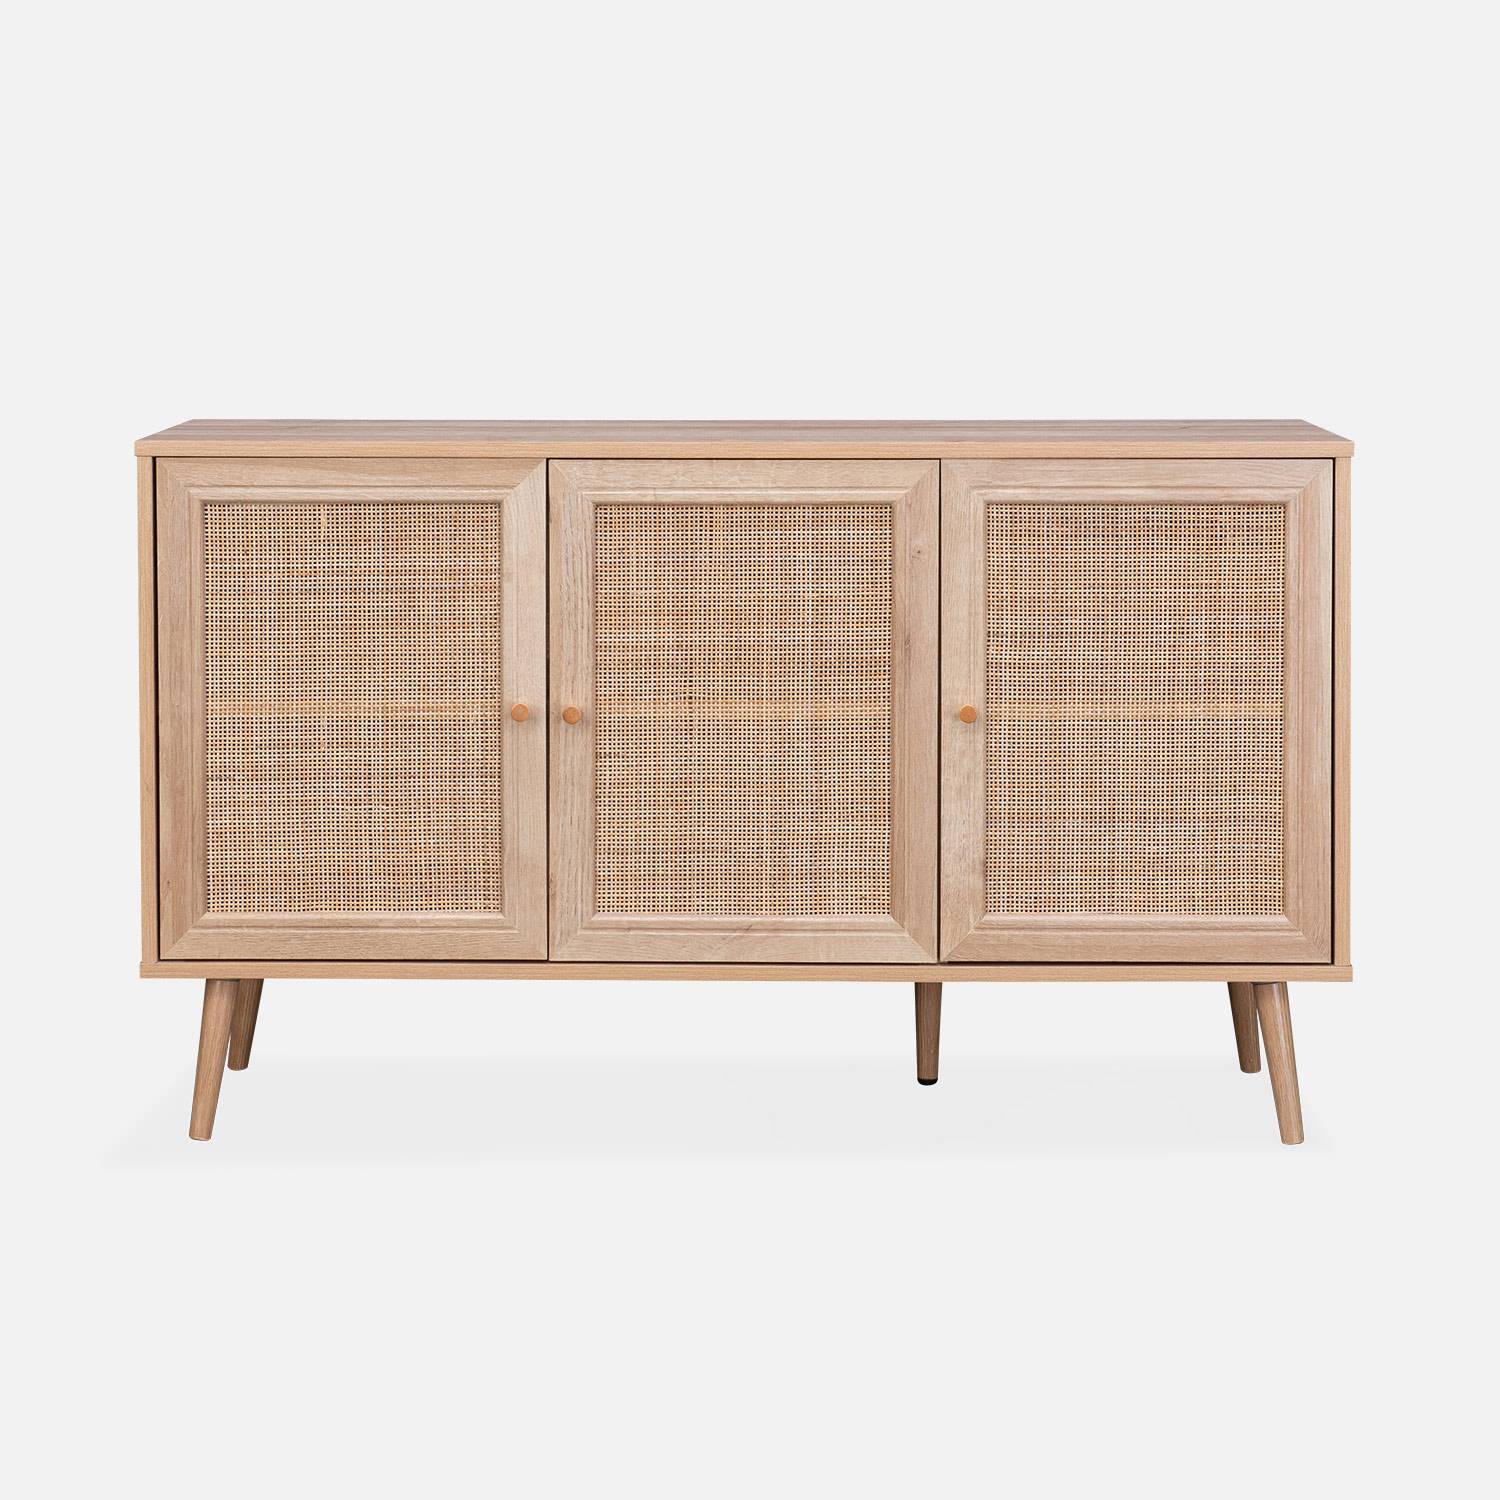 Wooden and cane rattan detail sideboard with 3 doors, 2 shelves, Scandi-style legs, 120x39x70cm - Boheme - Natural wood colour Photo4